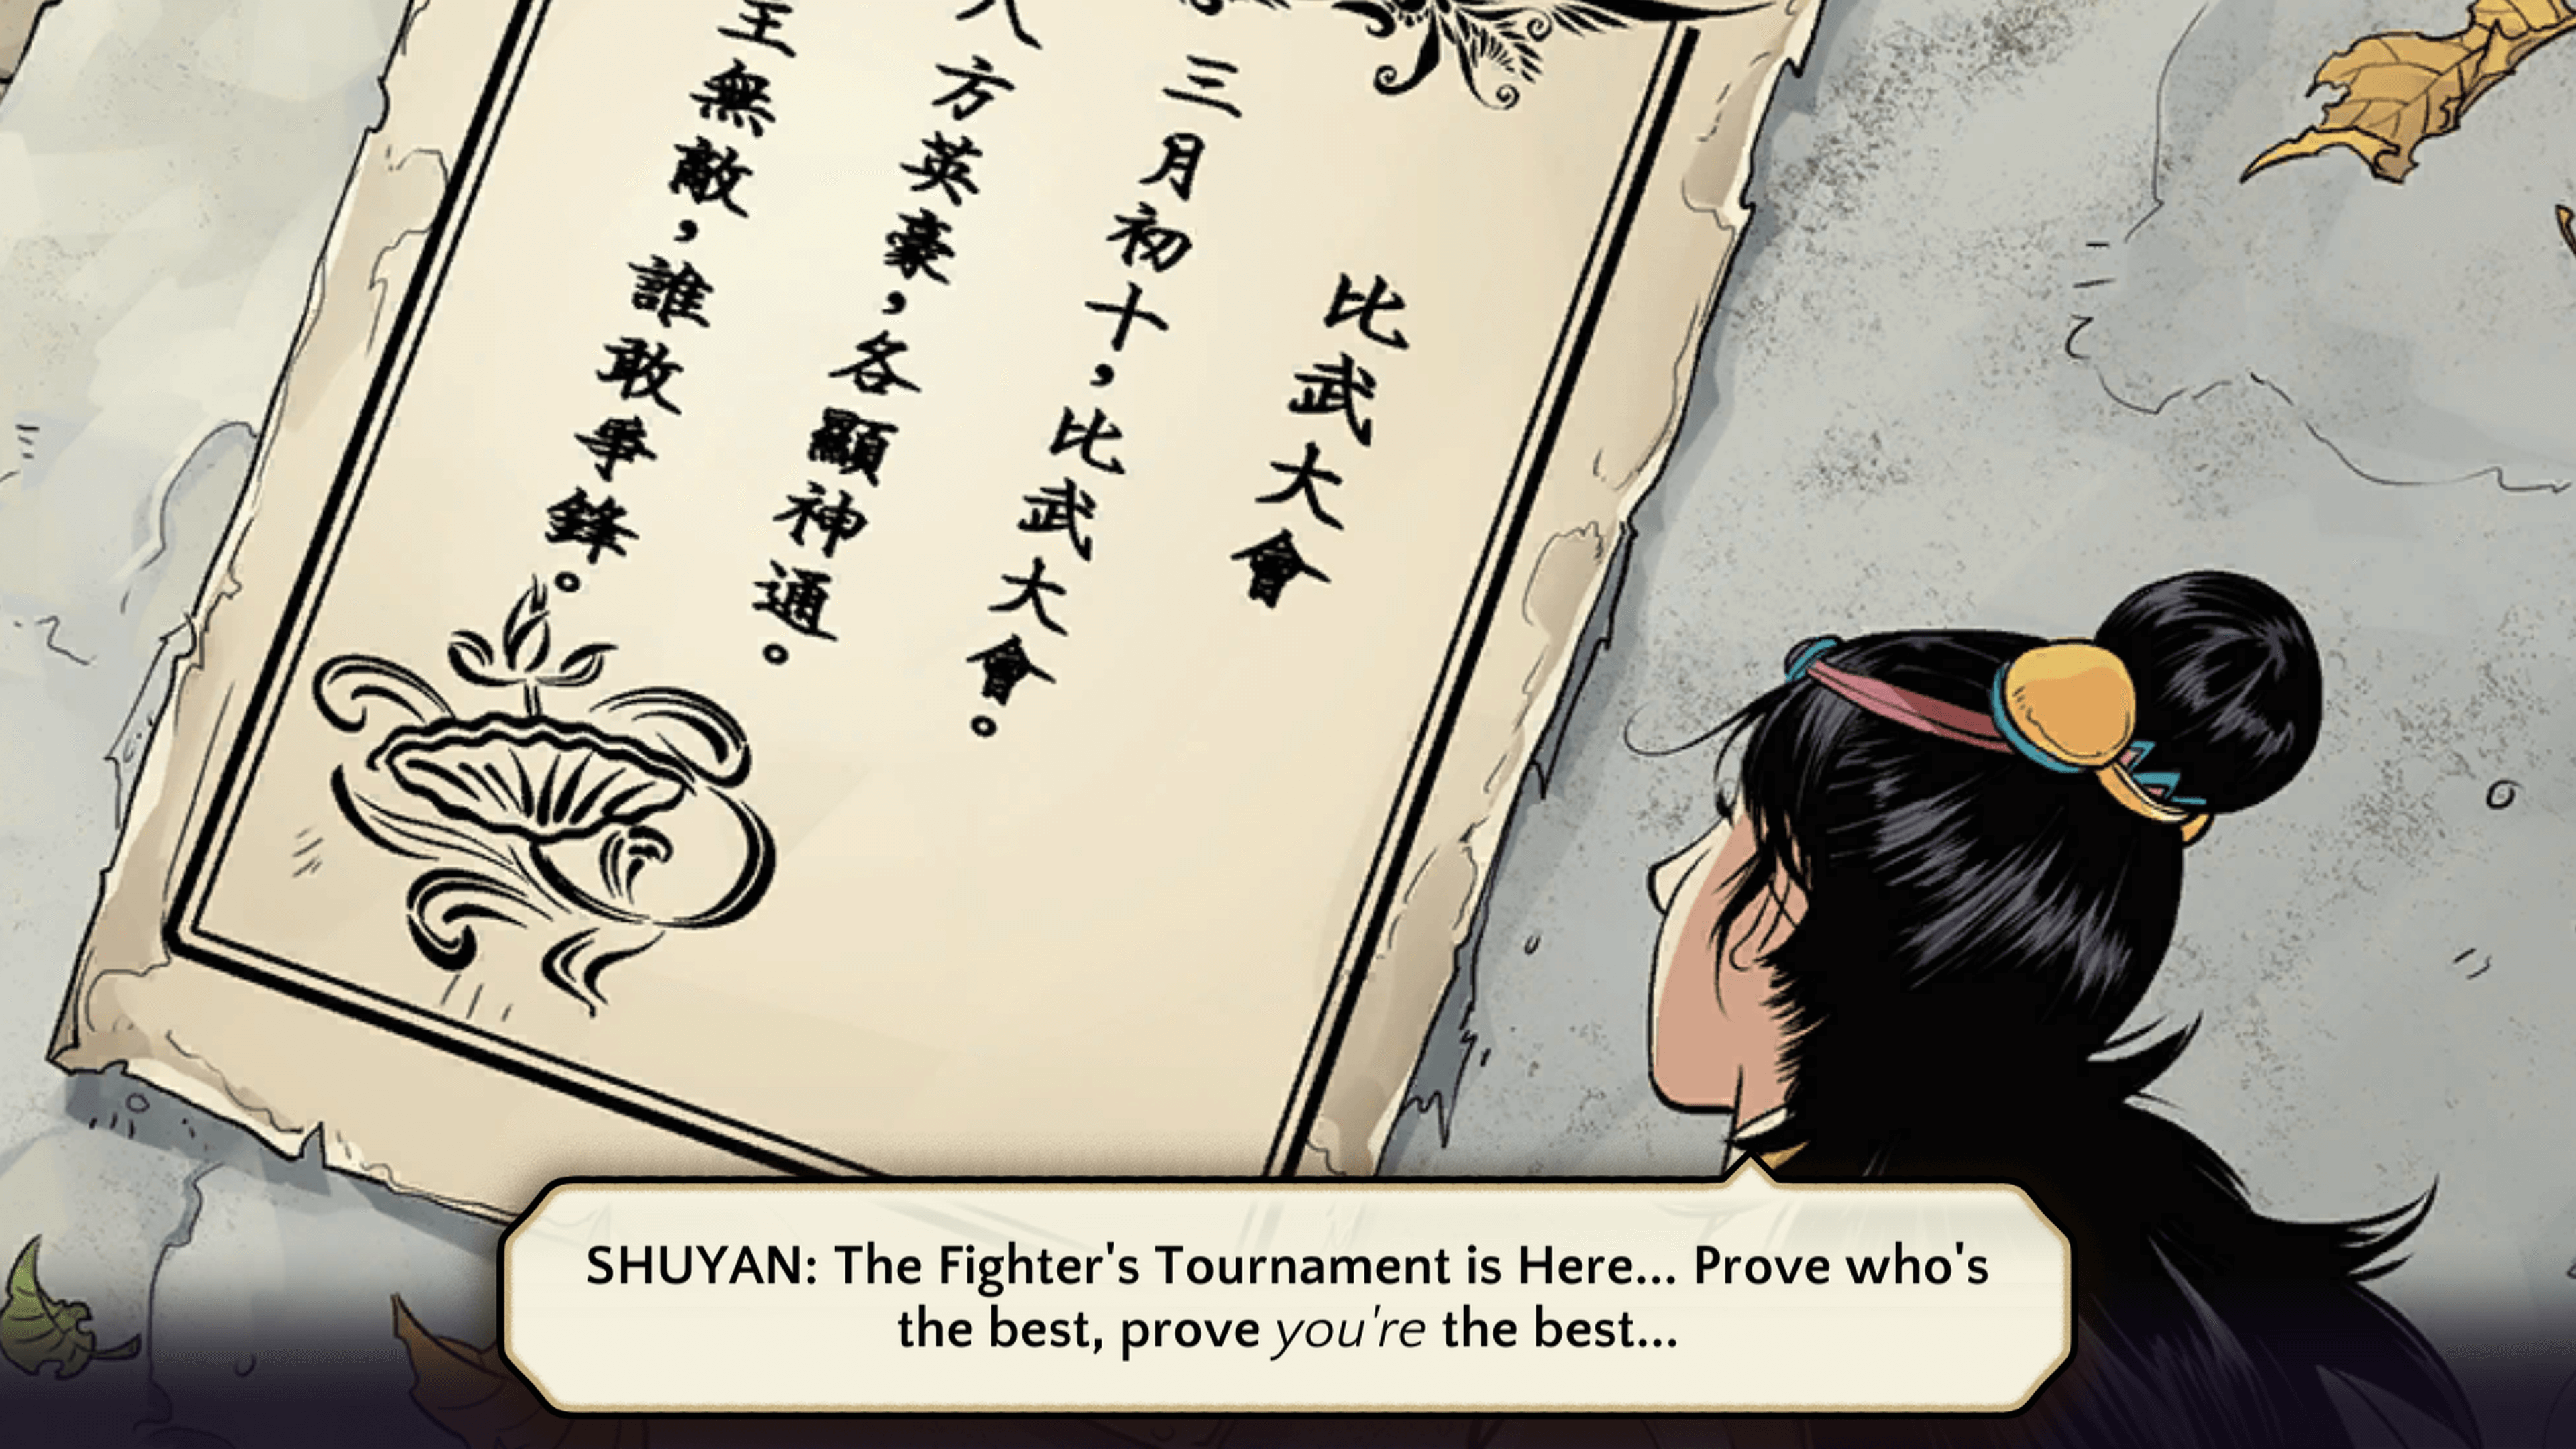 A young girl looks at a poster on a concrete wall. The poster has Chinese text on it and is translated in a dialogue box below "The Fighter's Tournament is Here... Prove who's the best, prove you're the best..."